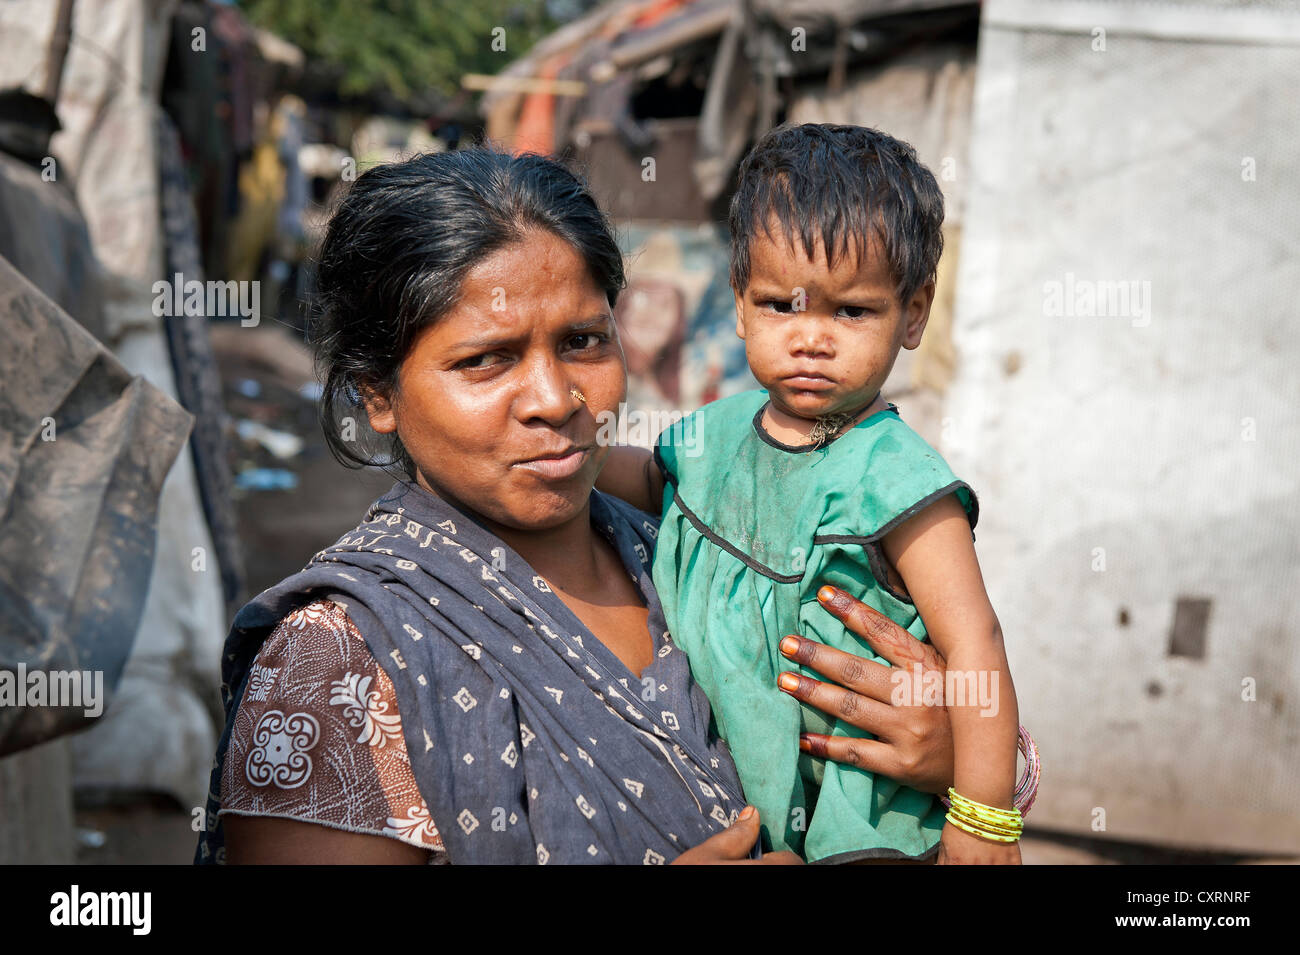 Woman with a toddler in her arms, slum, Shibpur district, Haora or Howrah, Kolkata or Calcutta, West Bengal, East India, India Stock Photo